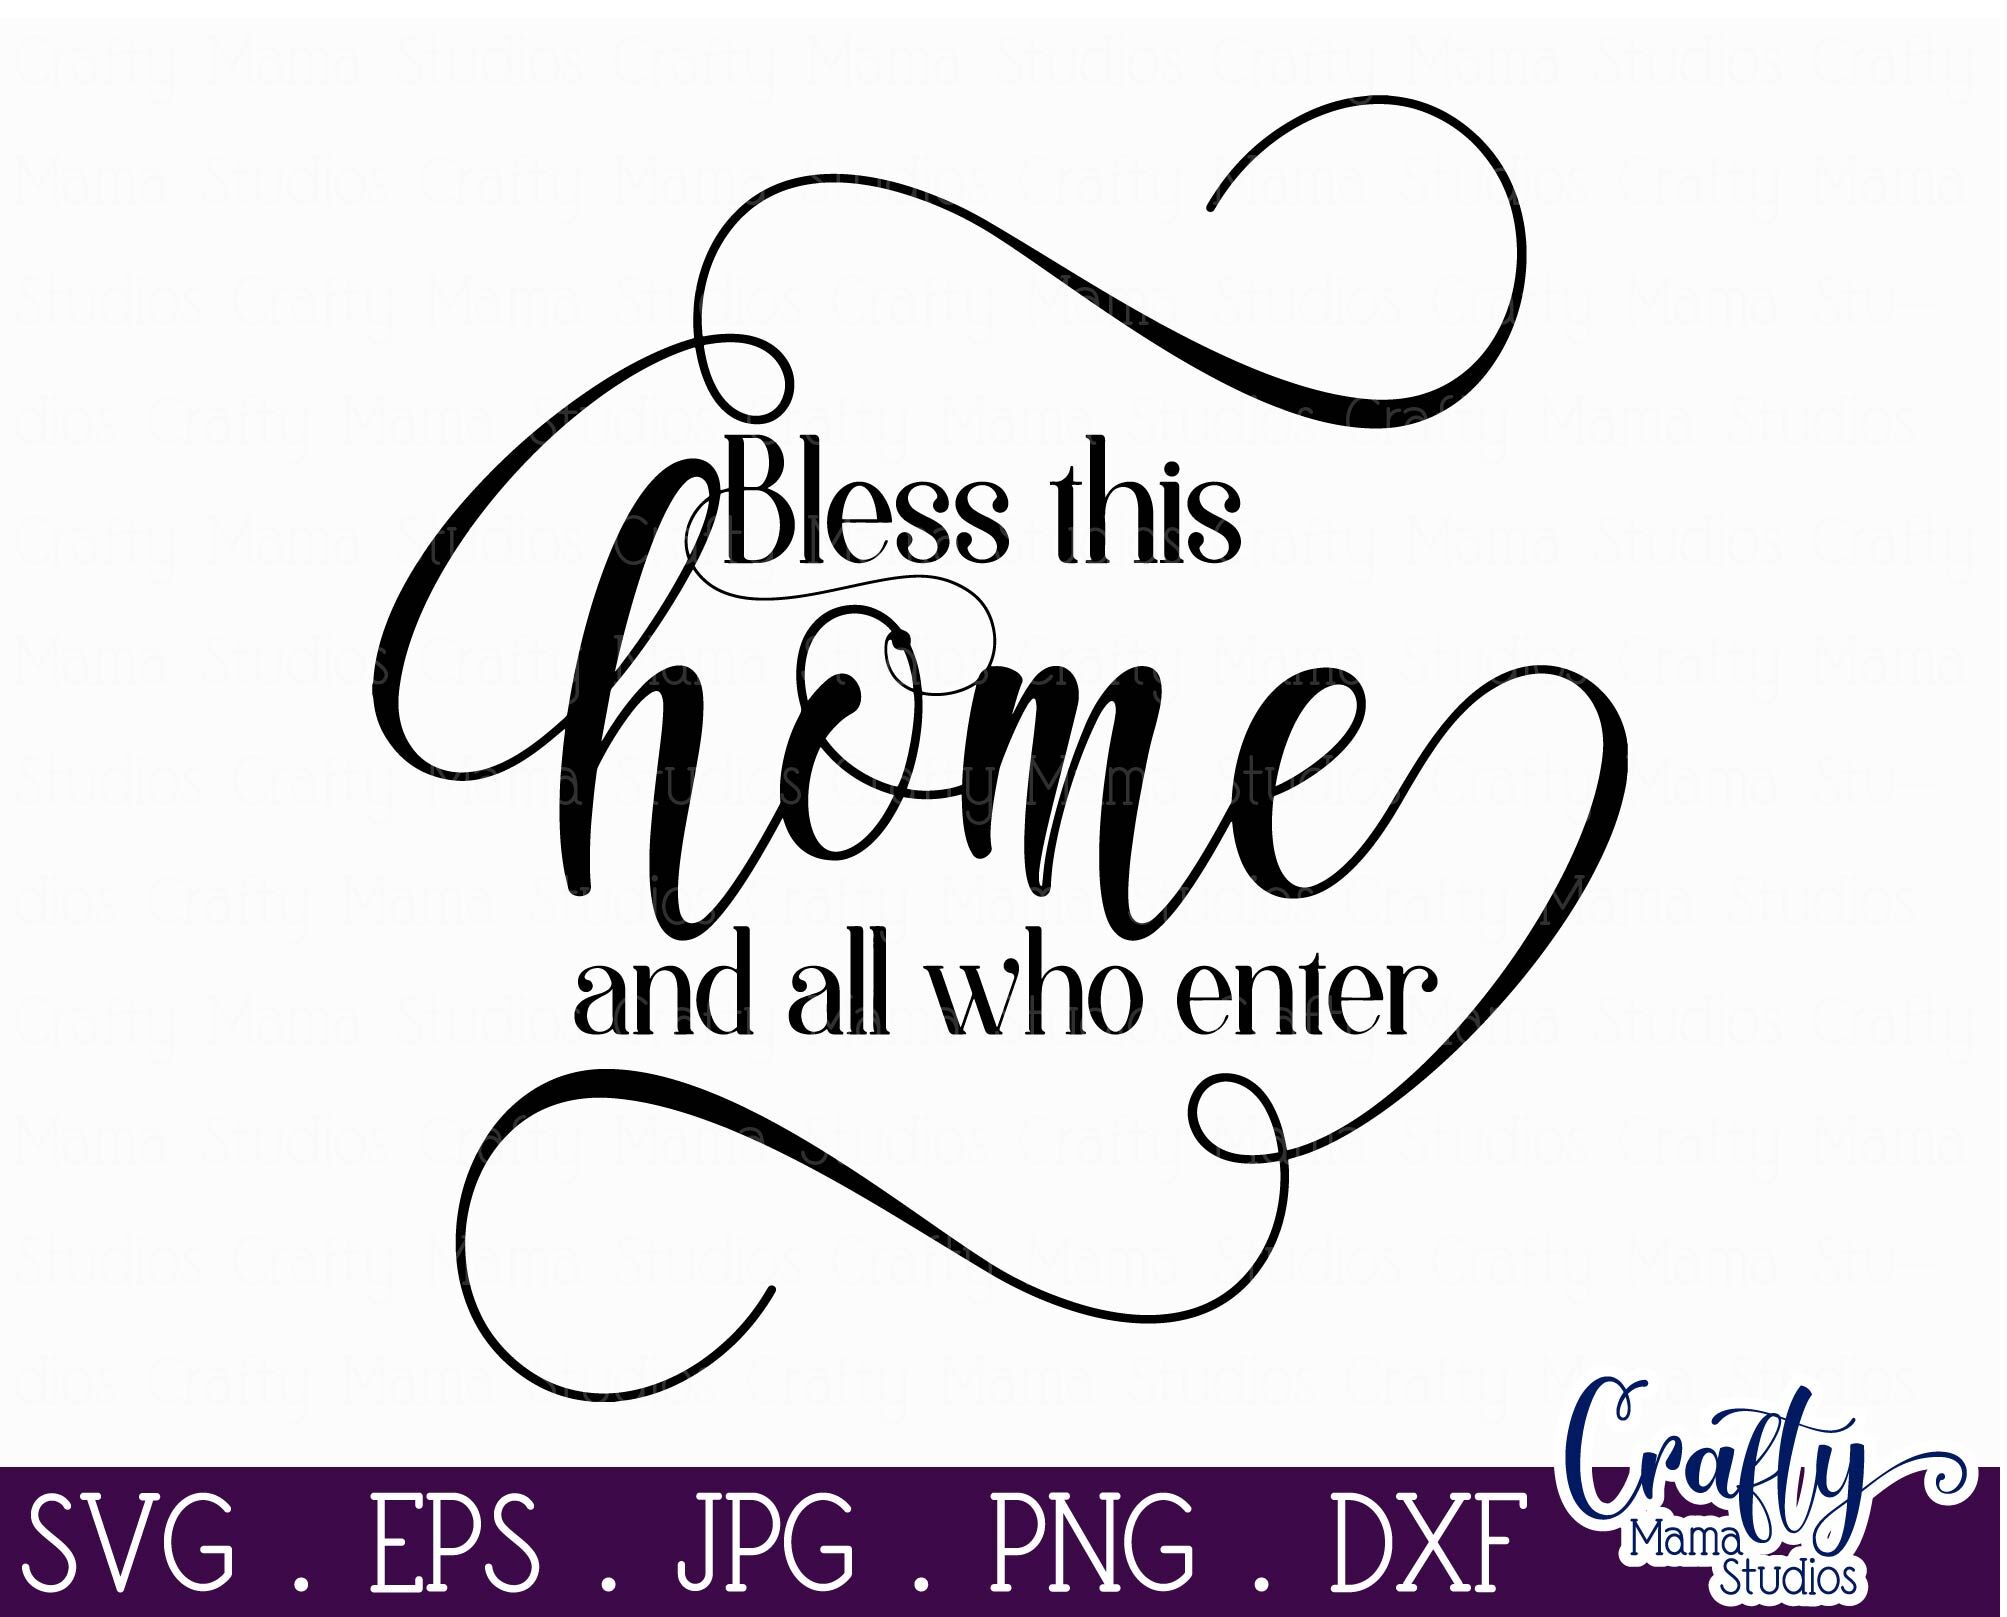 Download Home Svg Bless This Home Svg Family Svg All Who Enter By Crafty Mama Studios Thehungryjpeg Com